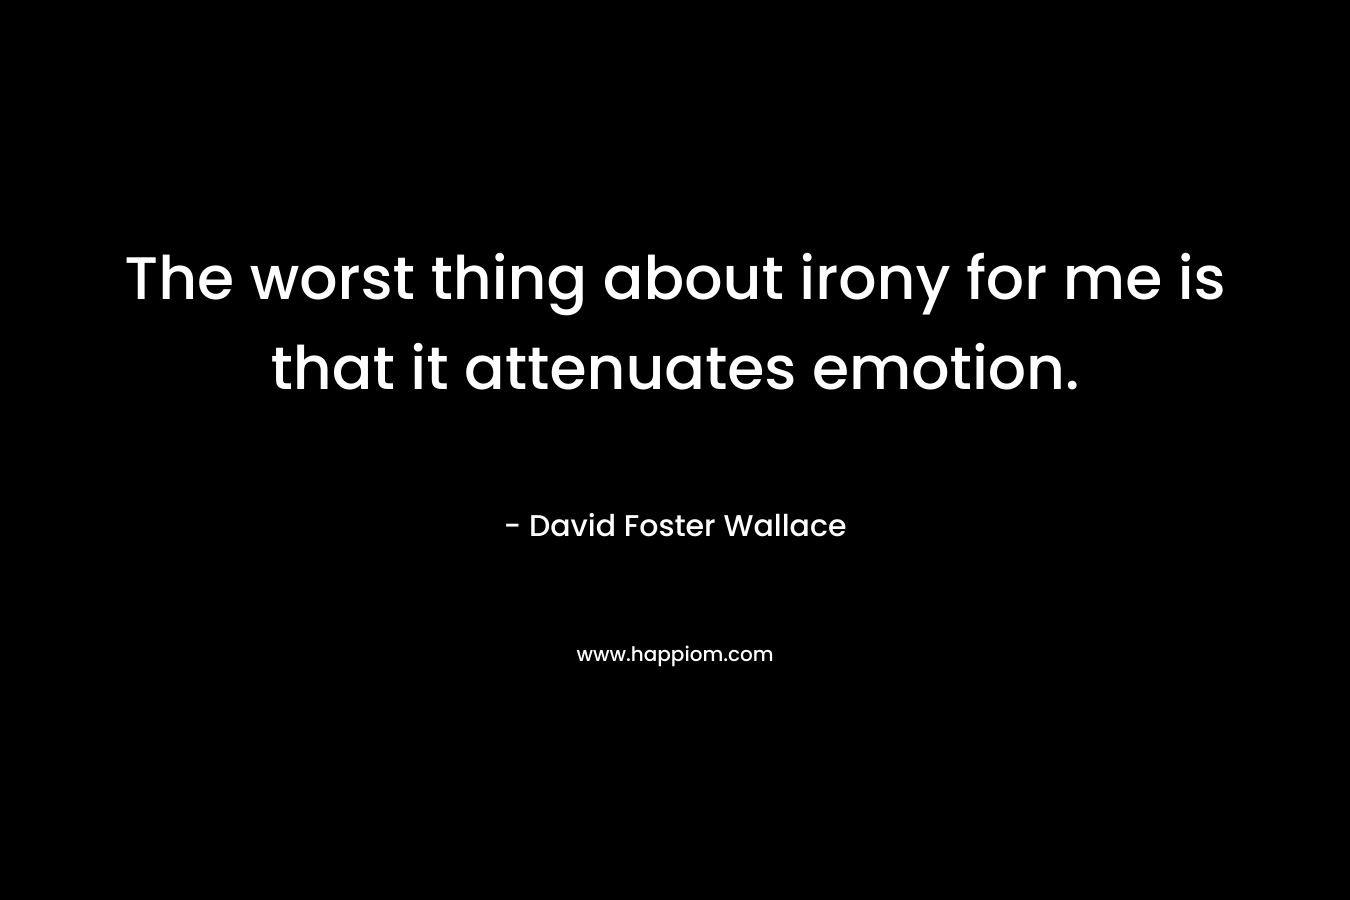 The worst thing about irony for me is that it attenuates emotion. – David Foster Wallace